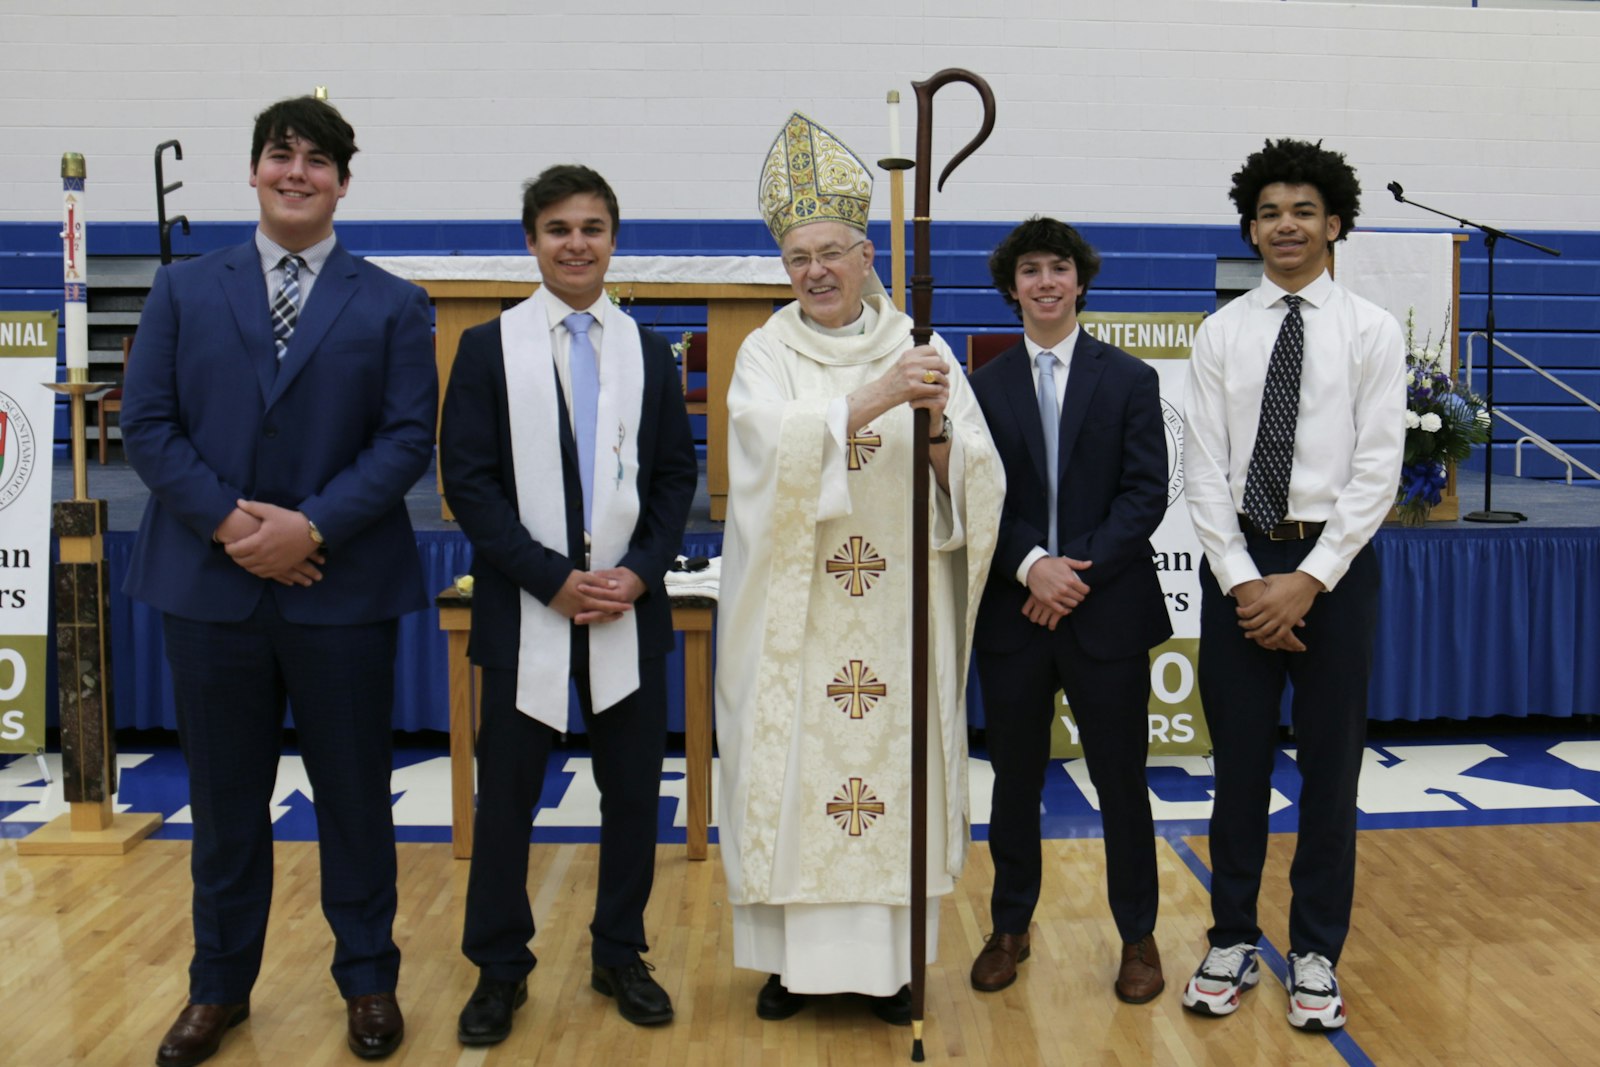 Bishop Hanchon presides during a confirmation Mass for four students at Detroit Catholic Central High School in Novi in April 2022. (Gabriella Patti | Detroit Catholic)